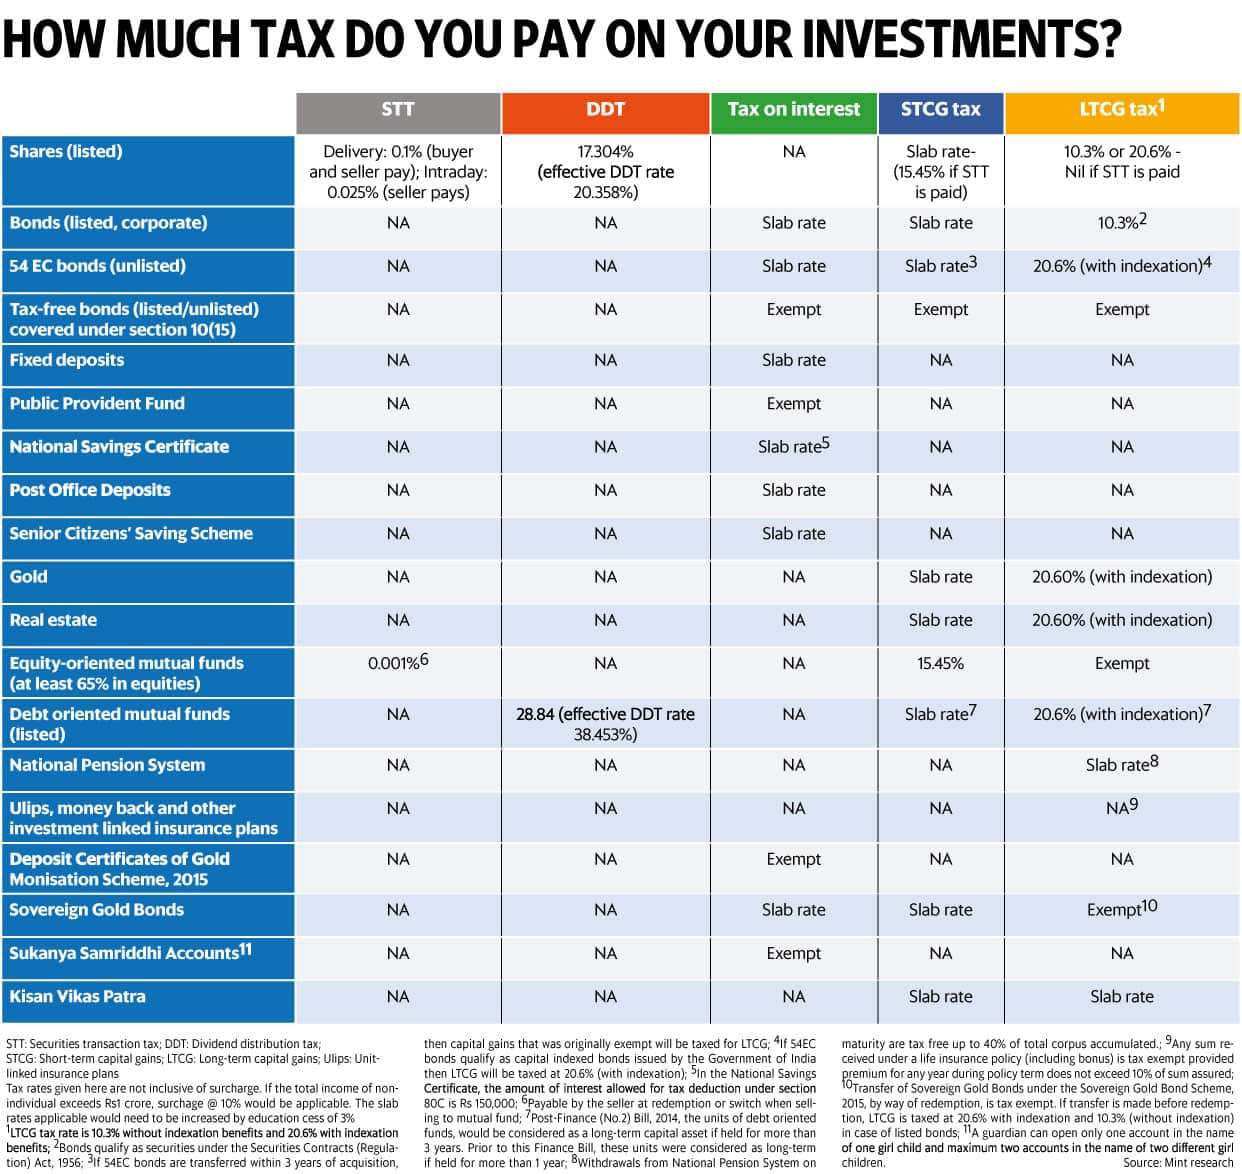 How much tax do you pay on your investments?